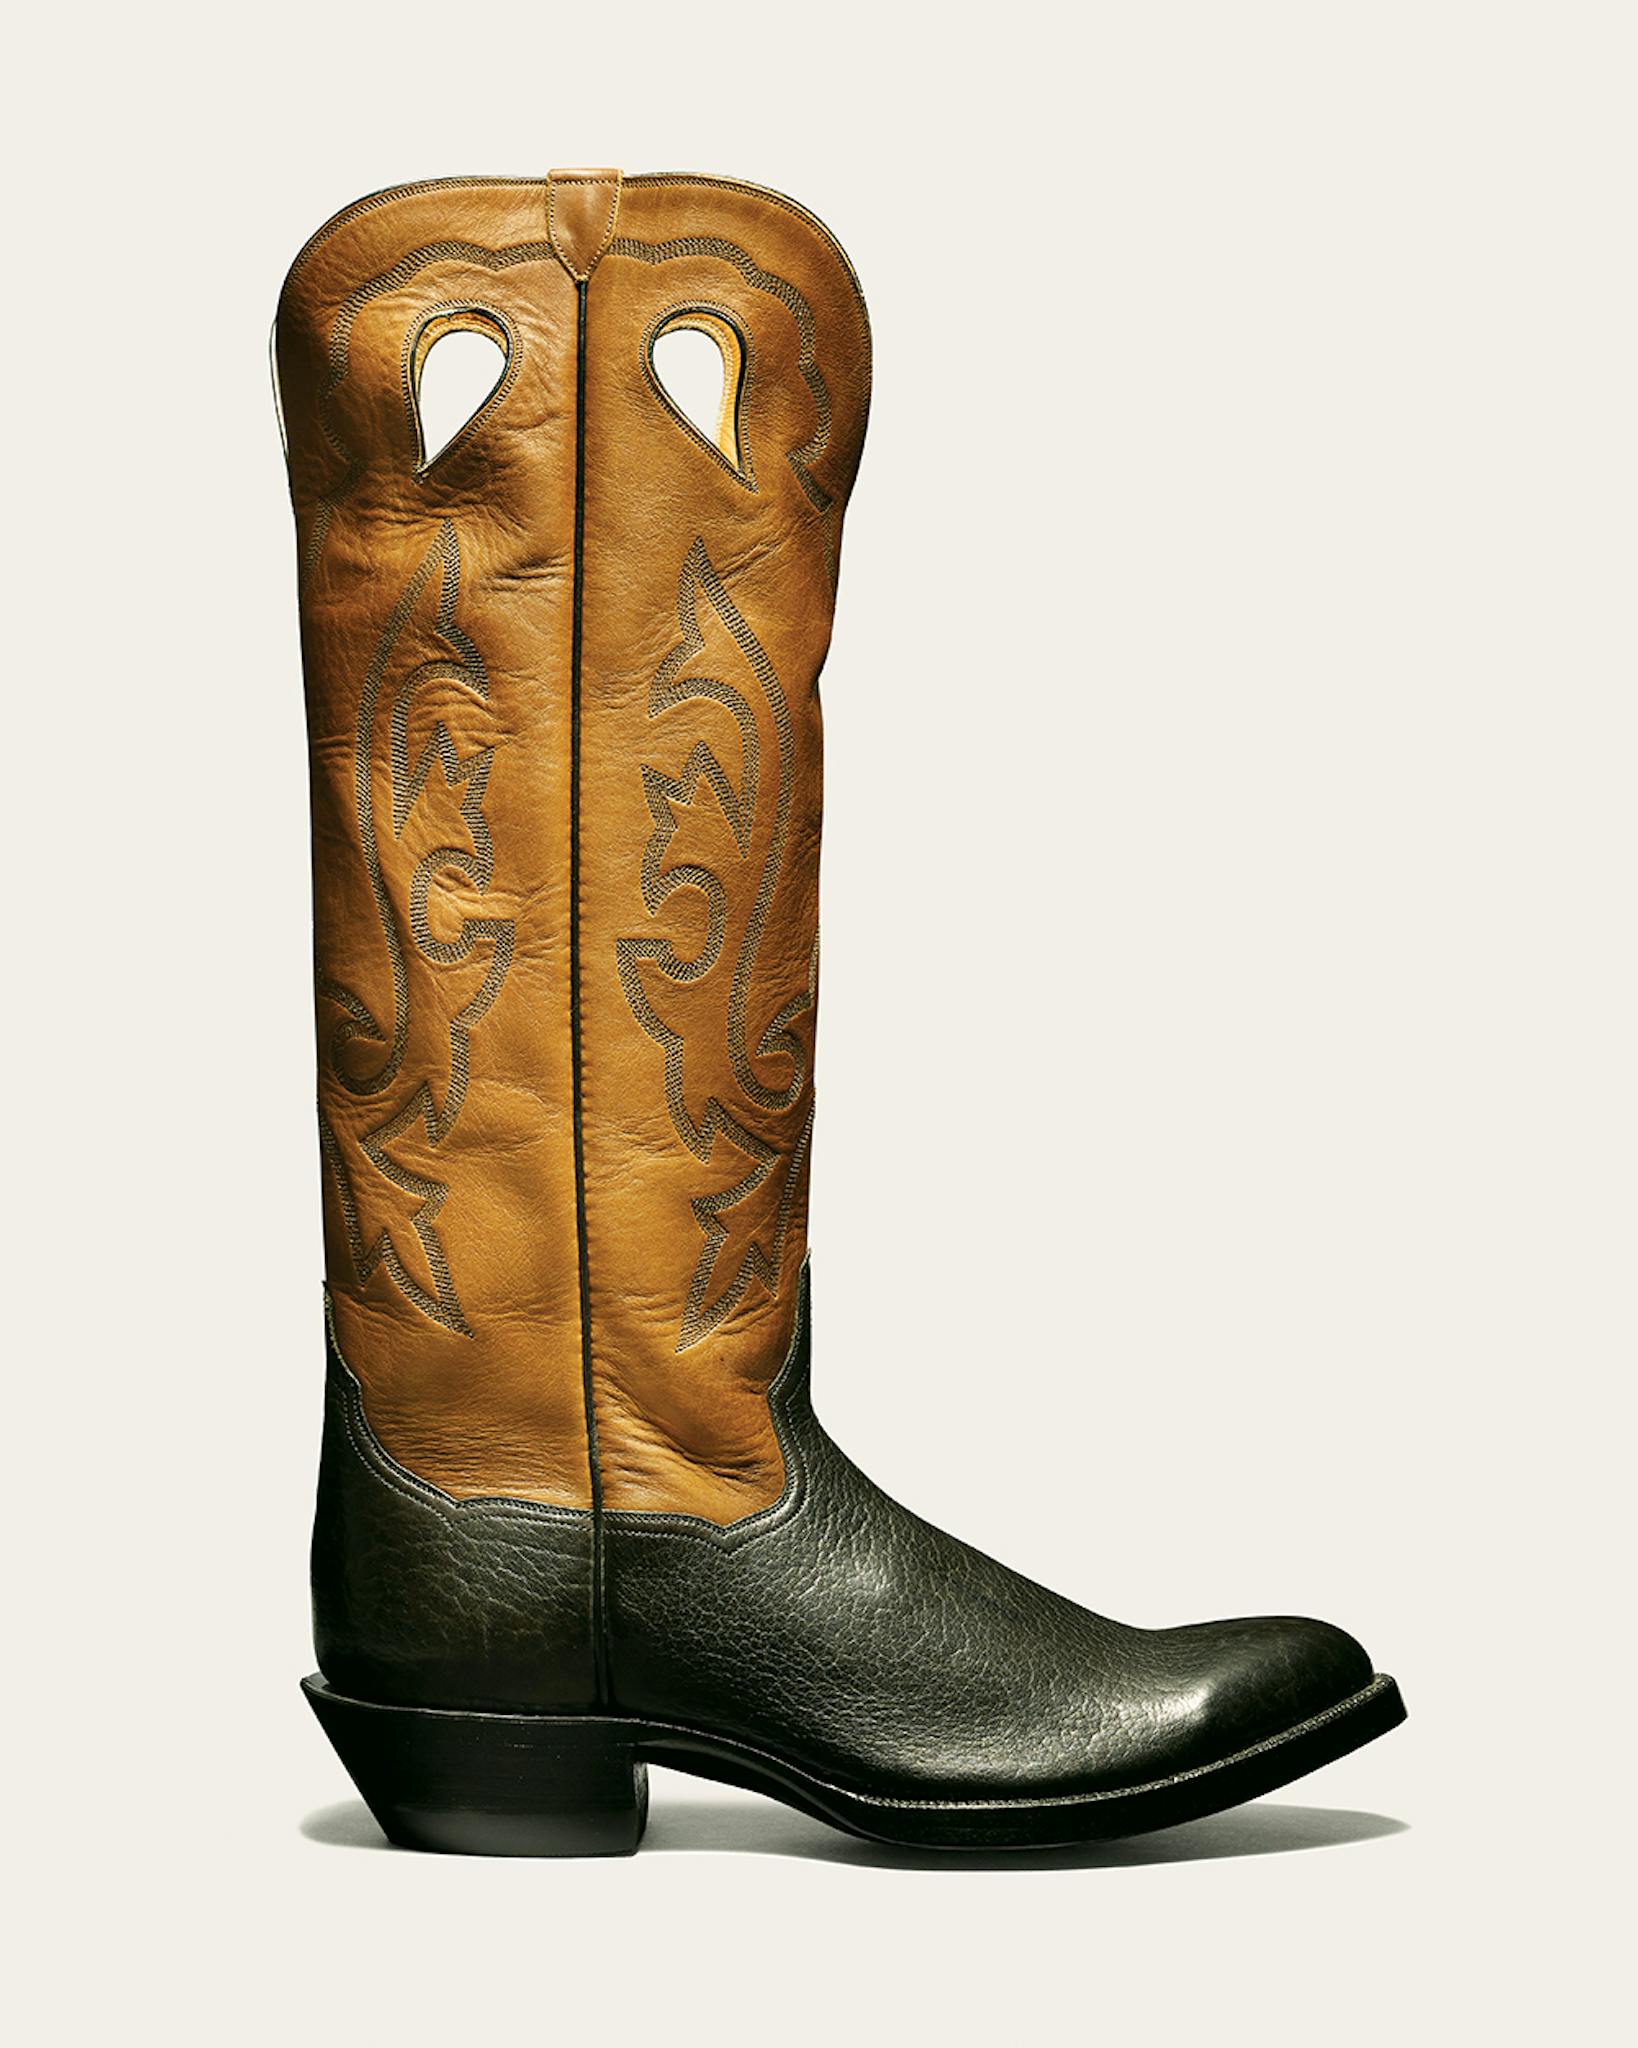 JB Hill tall boot with tan shaft and black vamp.